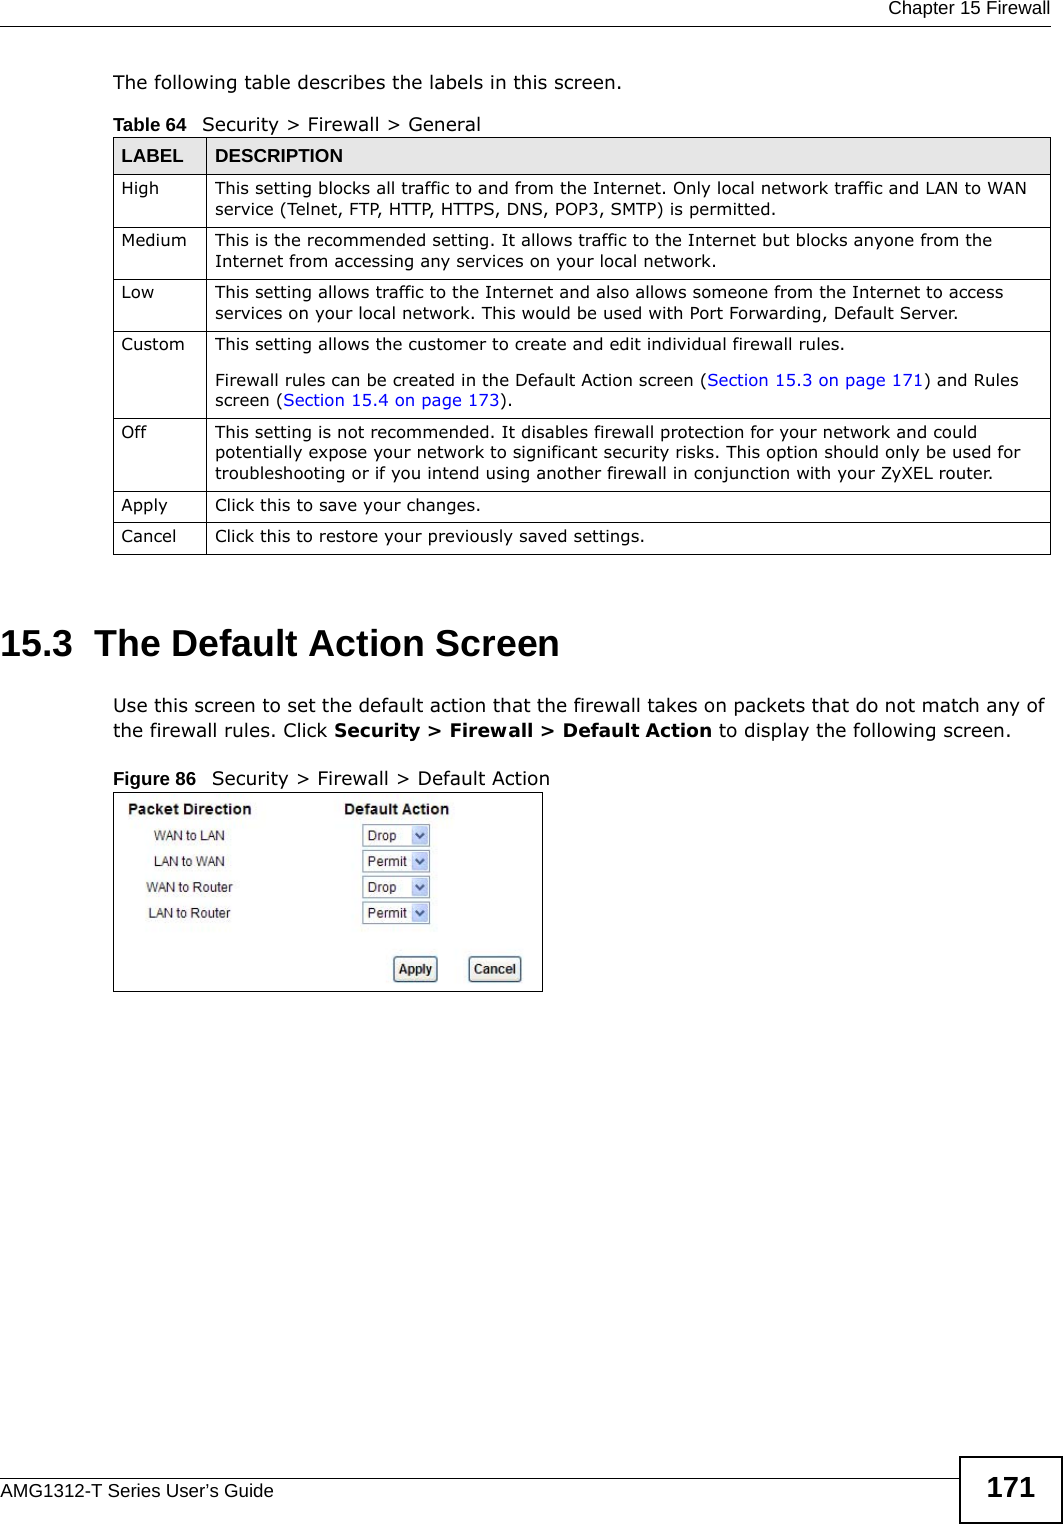  Chapter 15 FirewallAMG1312-T Series User’s Guide 171The following table describes the labels in this screen.15.3  The Default Action ScreenUse this screen to set the default action that the firewall takes on packets that do not match any of the firewall rules. Click Security &gt; Firewall &gt; Default Action to display the following screen.Figure 86   Security &gt; Firewall &gt; Default Action Table 64   Security &gt; Firewall &gt; GeneralLABEL DESCRIPTIONHigh This setting blocks all traffic to and from the Internet. Only local network traffic and LAN to WAN service (Telnet, FTP, HTTP, HTTPS, DNS, POP3, SMTP) is permitted. Medium This is the recommended setting. It allows traffic to the Internet but blocks anyone from the Internet from accessing any services on your local network. Low This setting allows traffic to the Internet and also allows someone from the Internet to access services on your local network. This would be used with Port Forwarding, Default Server. Custom This setting allows the customer to create and edit individual firewall rules. Firewall rules can be created in the Default Action screen (Section 15.3 on page 171) and Rules screen (Section 15.4 on page 173).Off This setting is not recommended. It disables firewall protection for your network and could potentially expose your network to significant security risks. This option should only be used for troubleshooting or if you intend using another firewall in conjunction with your ZyXEL router.Apply Click this to save your changes.Cancel Click this to restore your previously saved settings.